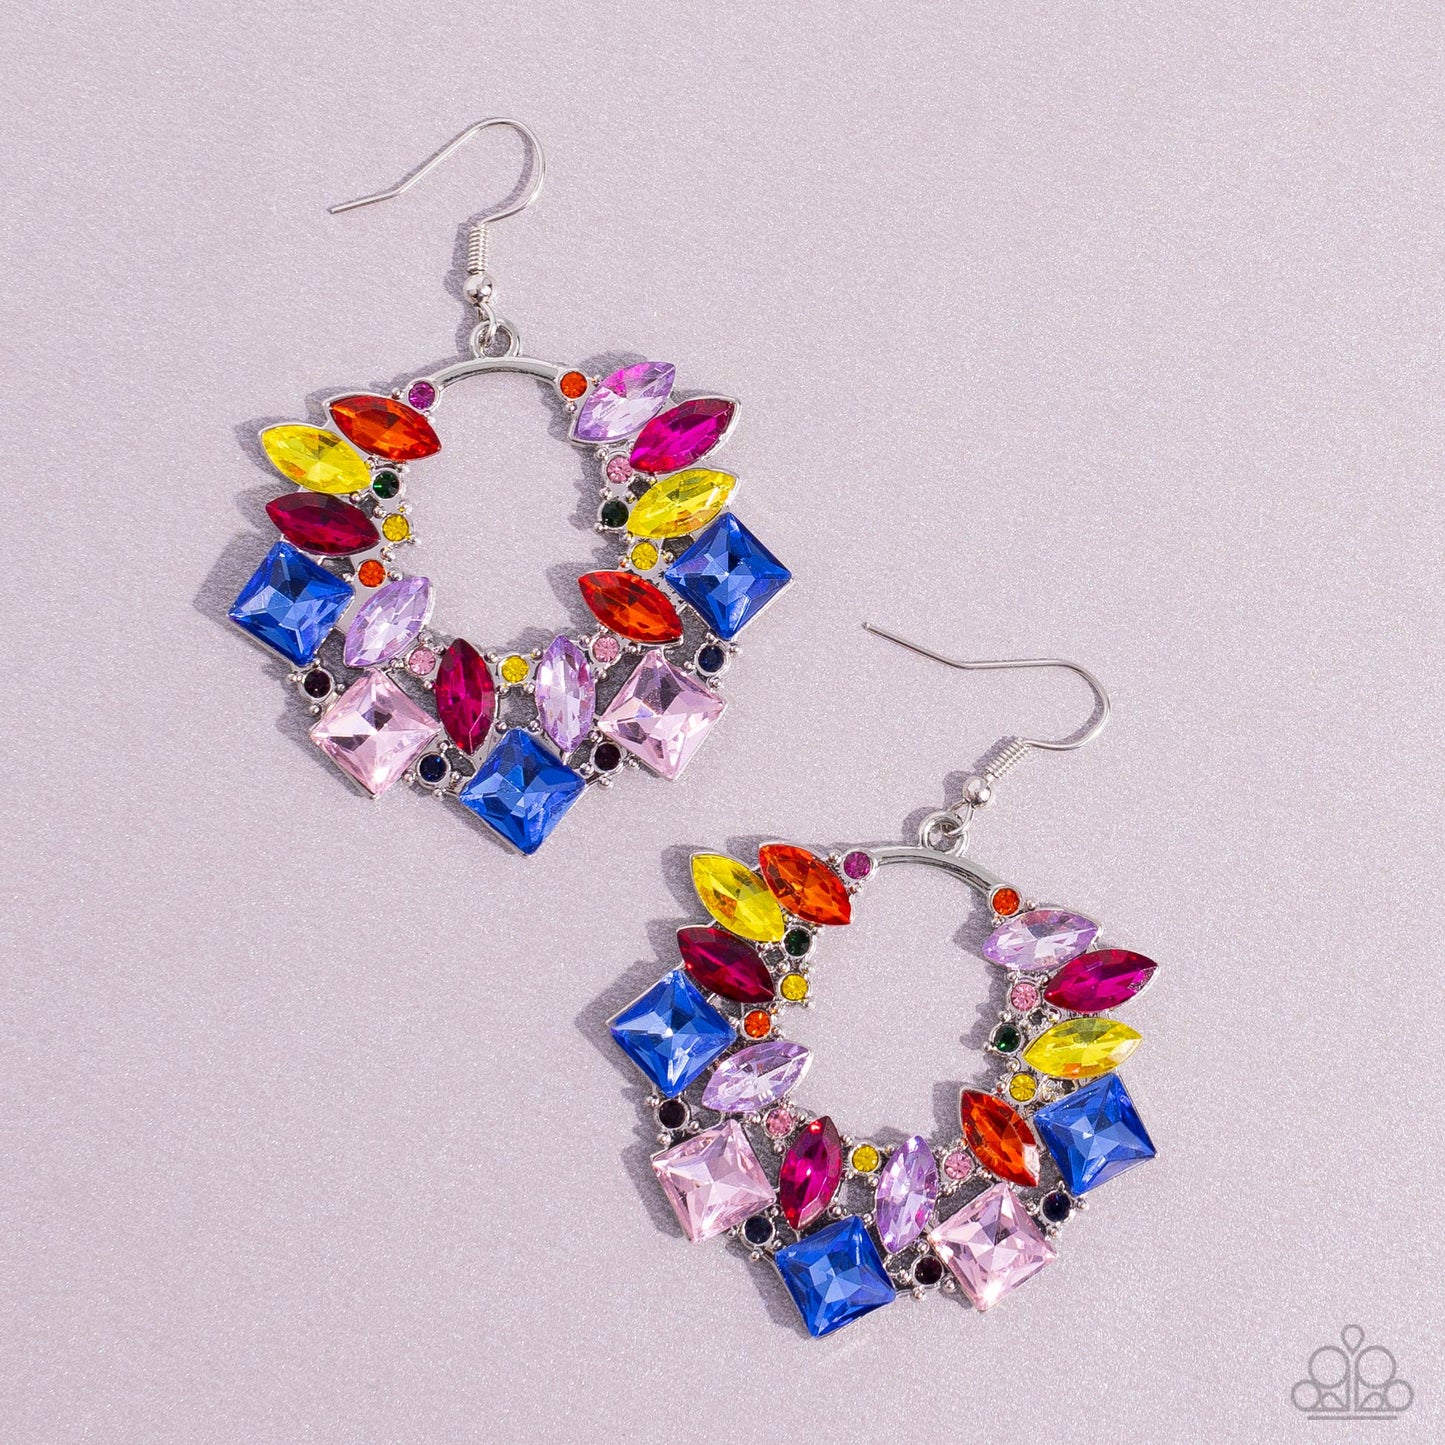 Wreathed in Watercolors - Multi Color Earrings - Paparazzi Accessories - A glassy collection of various multicolored rhinestones explodes across the front of a silver wreath, resulting in a geometric, jaw-dropping dazzle earrings.